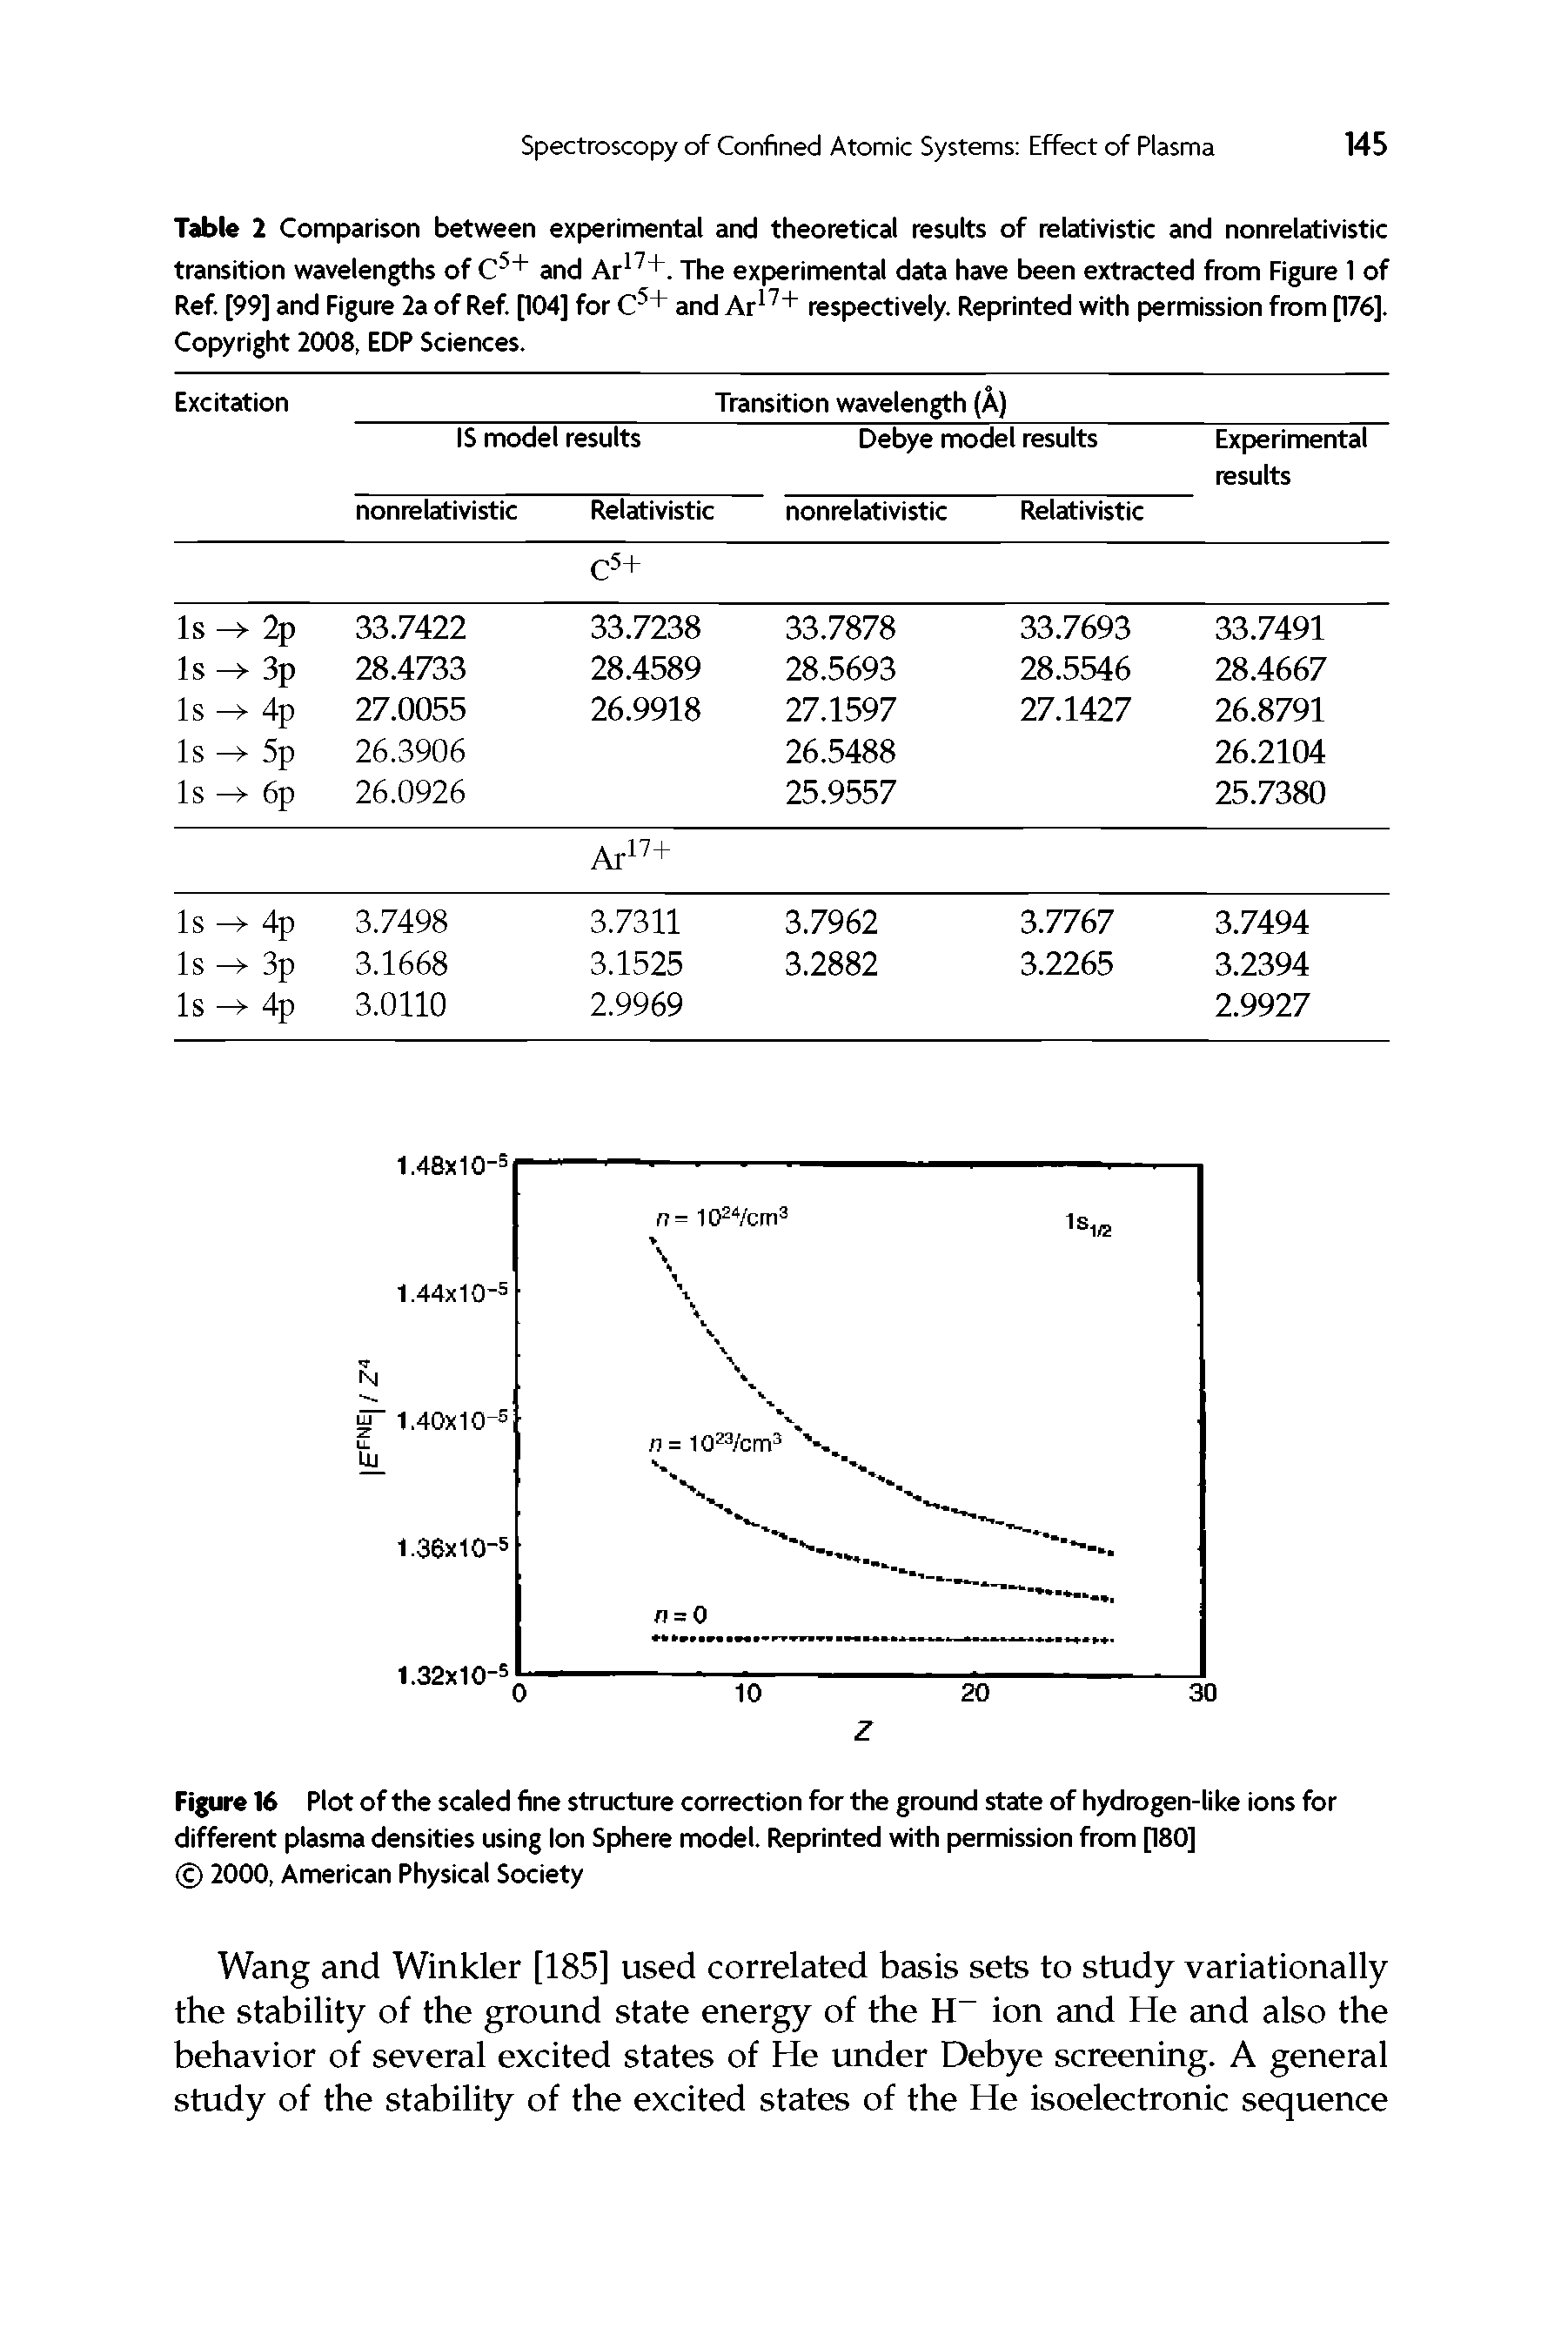 Table 2 Comparison between experimental and theoretical results of relativistic and nonrelativistic transition wavelengths of C5+ and Ar17+. The experimental data have been extracted from Figure 1 of Ref. [99] and Figure 2a of Ref. [104] for C5+ and Ar17+ respectively. Reprinted with permission from [176], Copyright 2008, EDP Sciences.